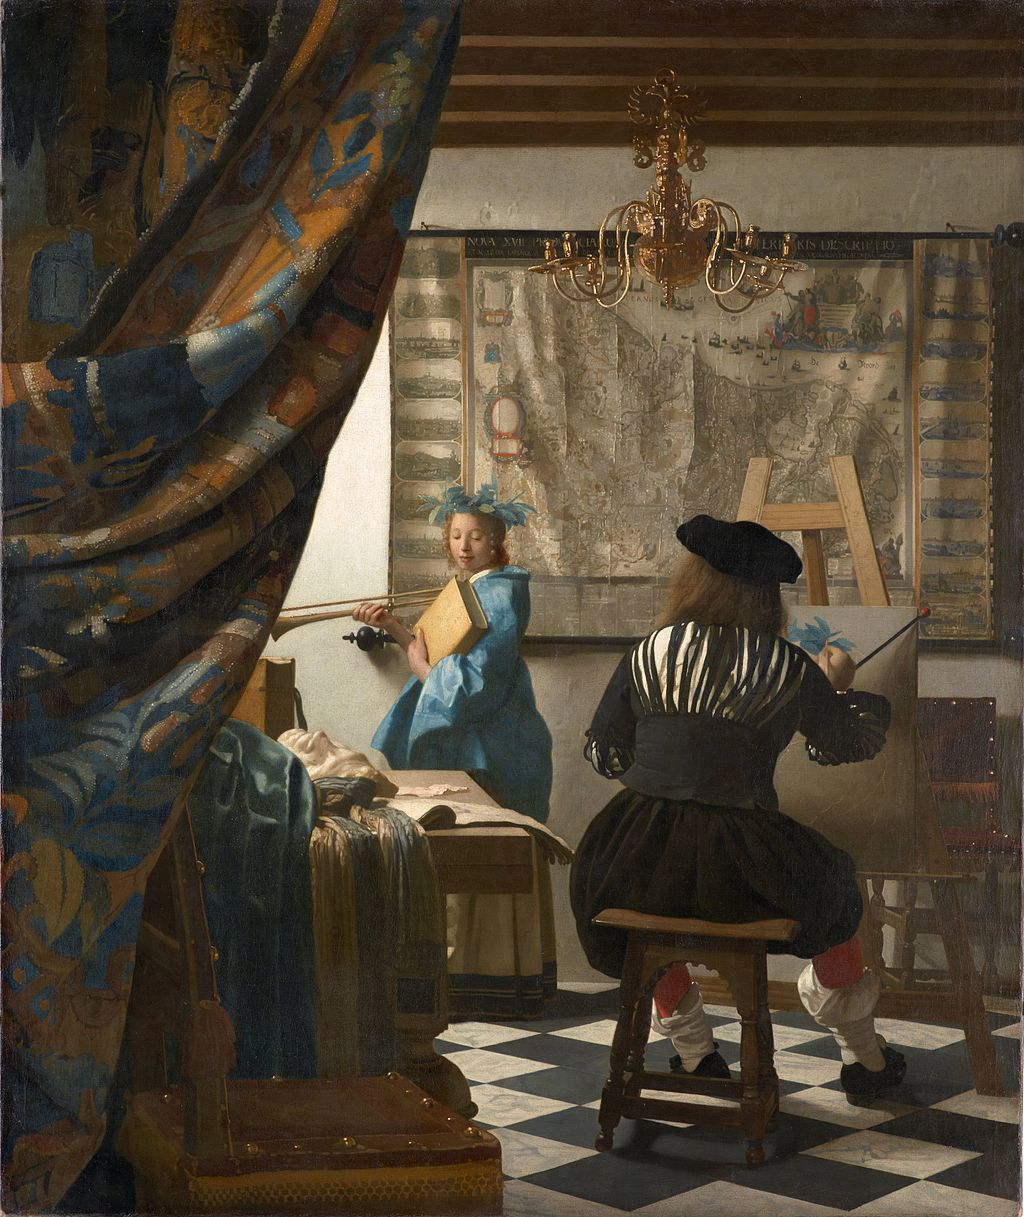 The Art of Painting by Johannes Vermeer in the Kunsthistorisches Museum in Vienna